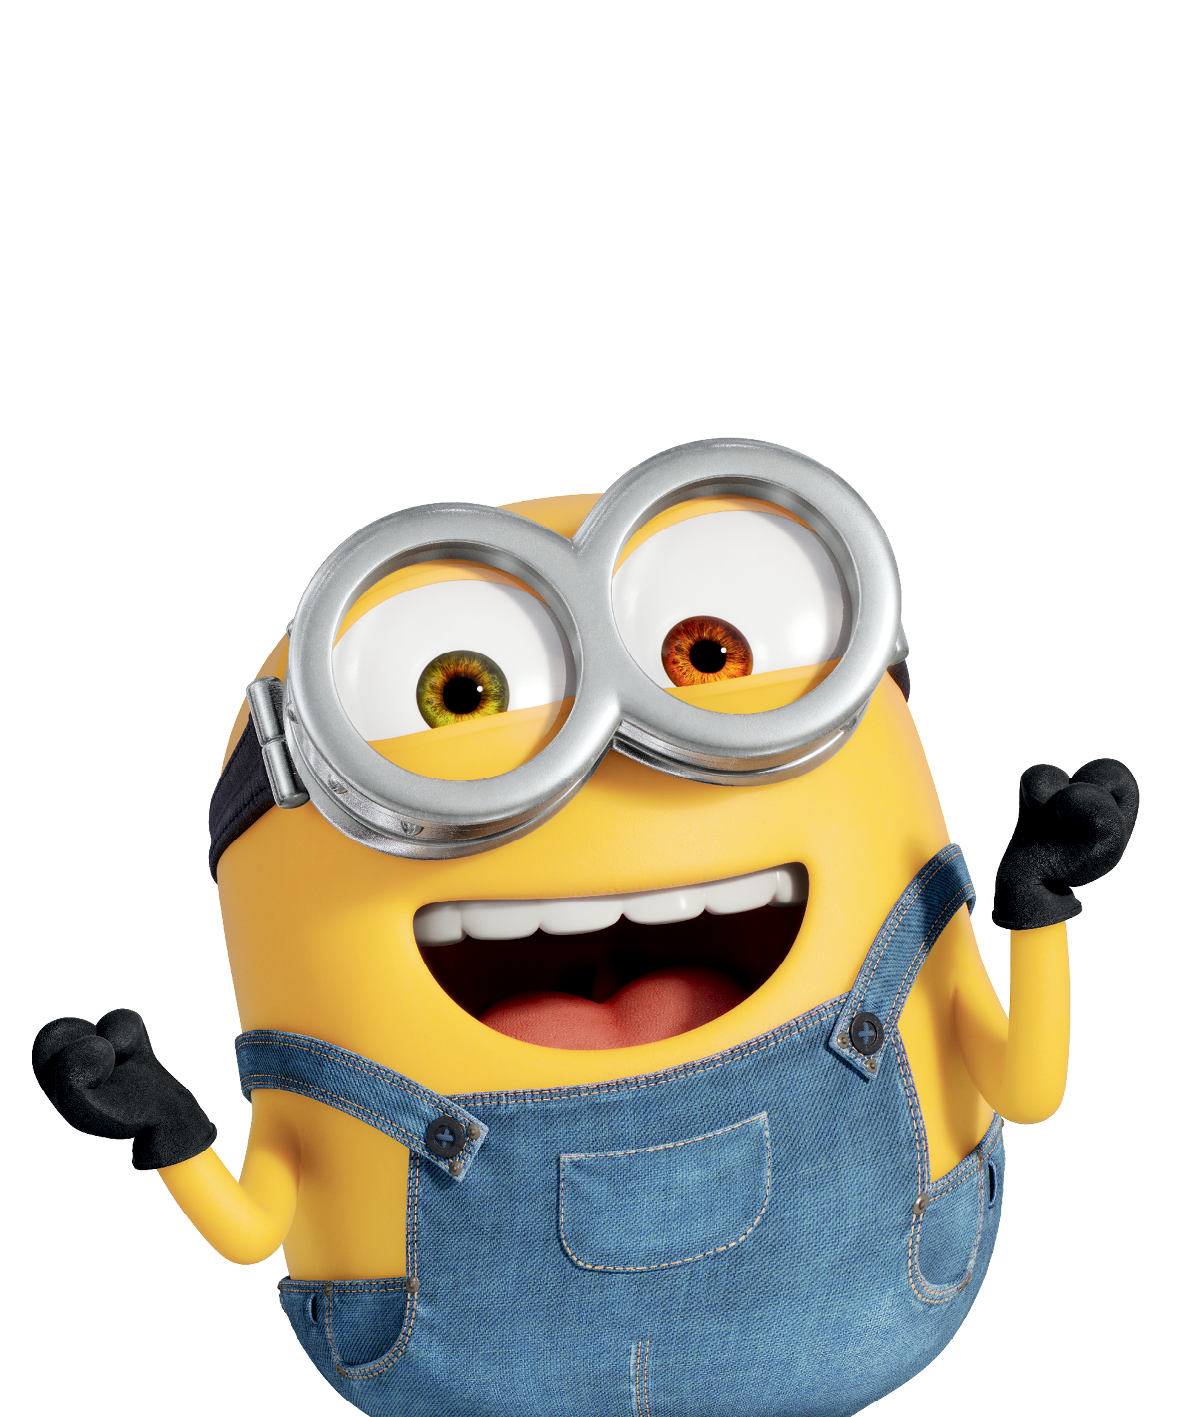 Minions Box office Debut Record Picture of Bob from illumination entertainment. 